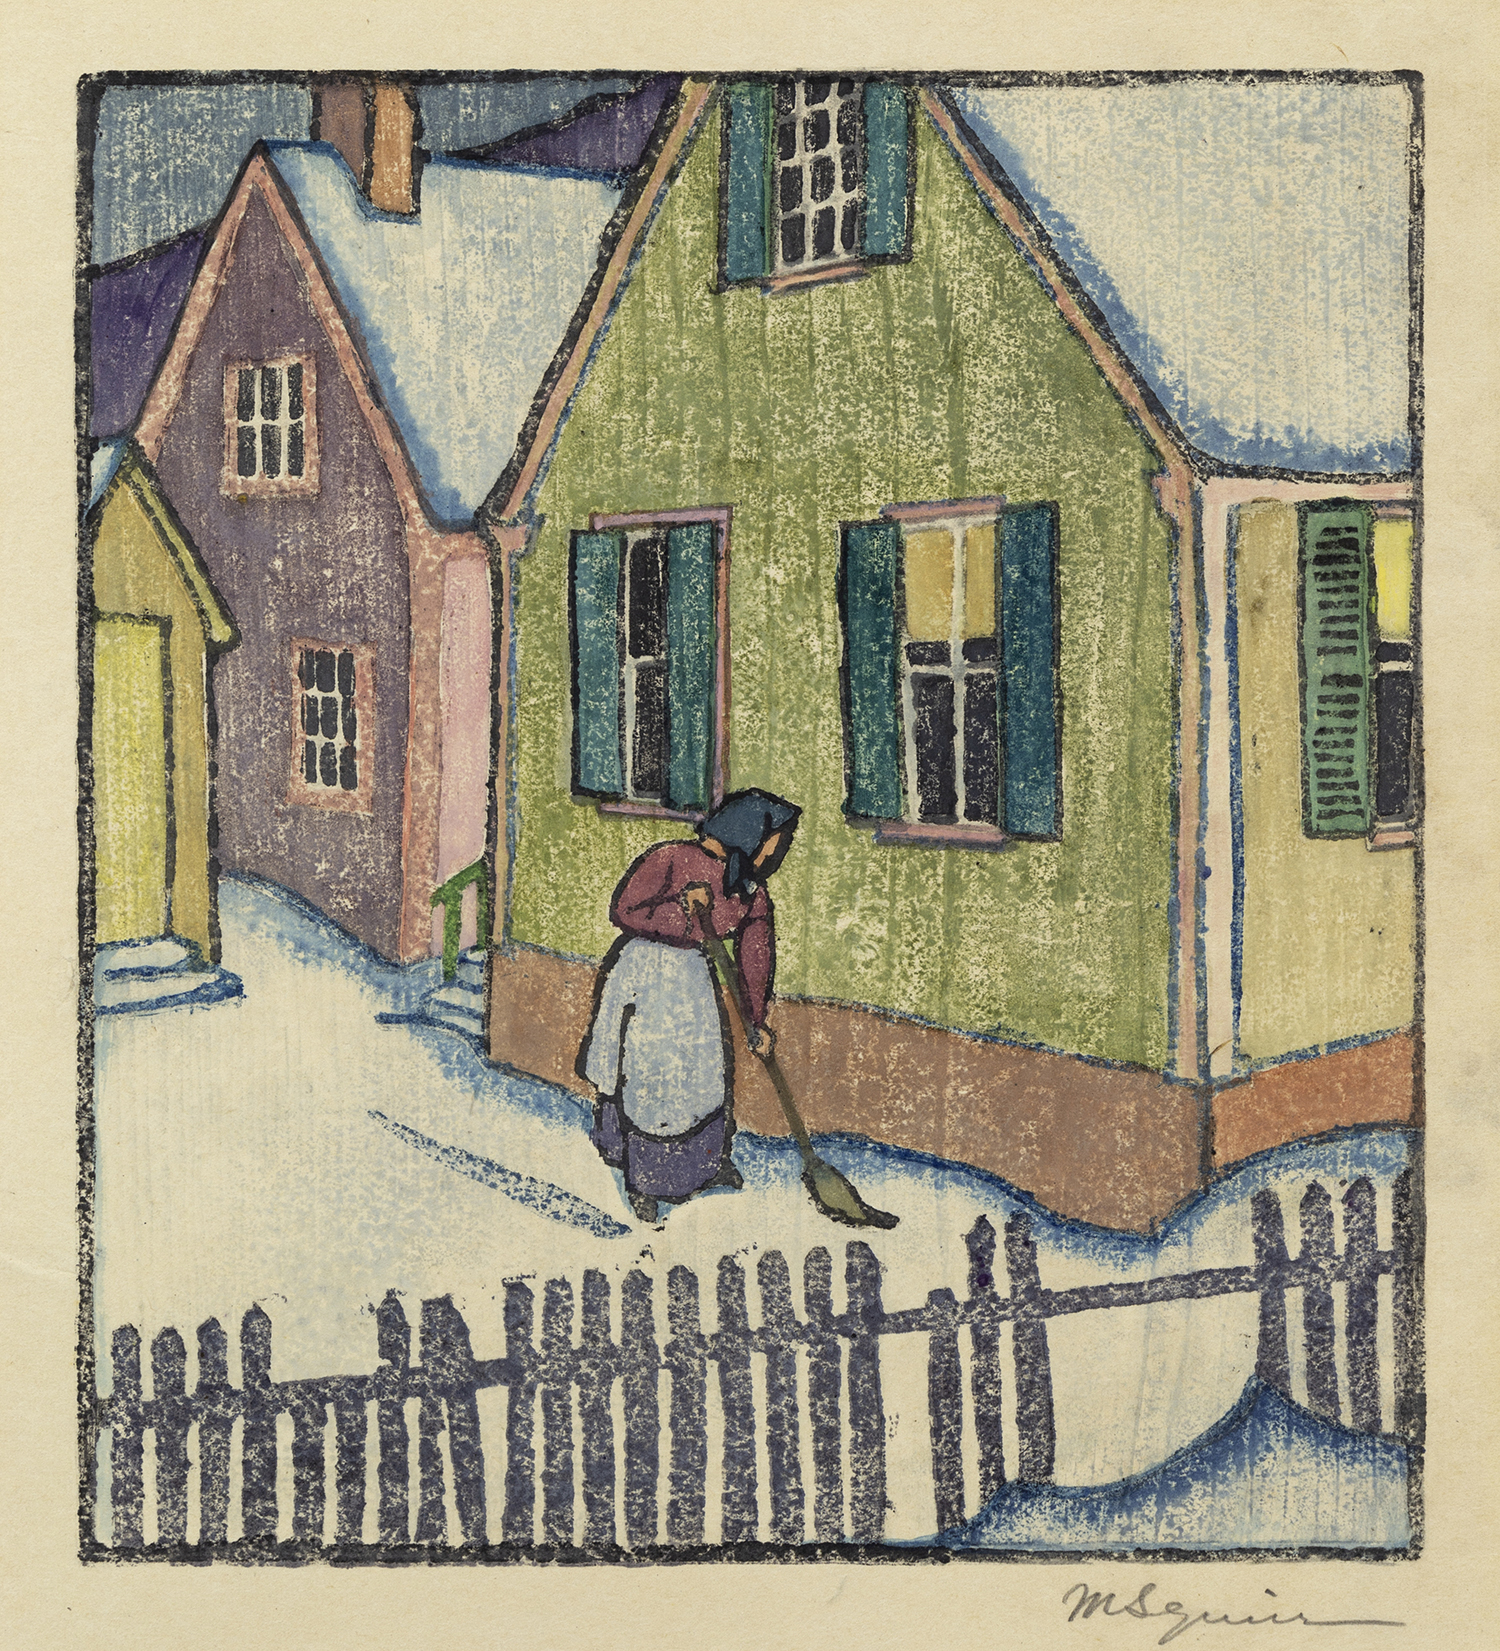 Untitled (Sweeping snow Provincetown), 1917, Provincetown color woodcut, 18 x 15 1/2 inches (45.7 x 39.4 cm)